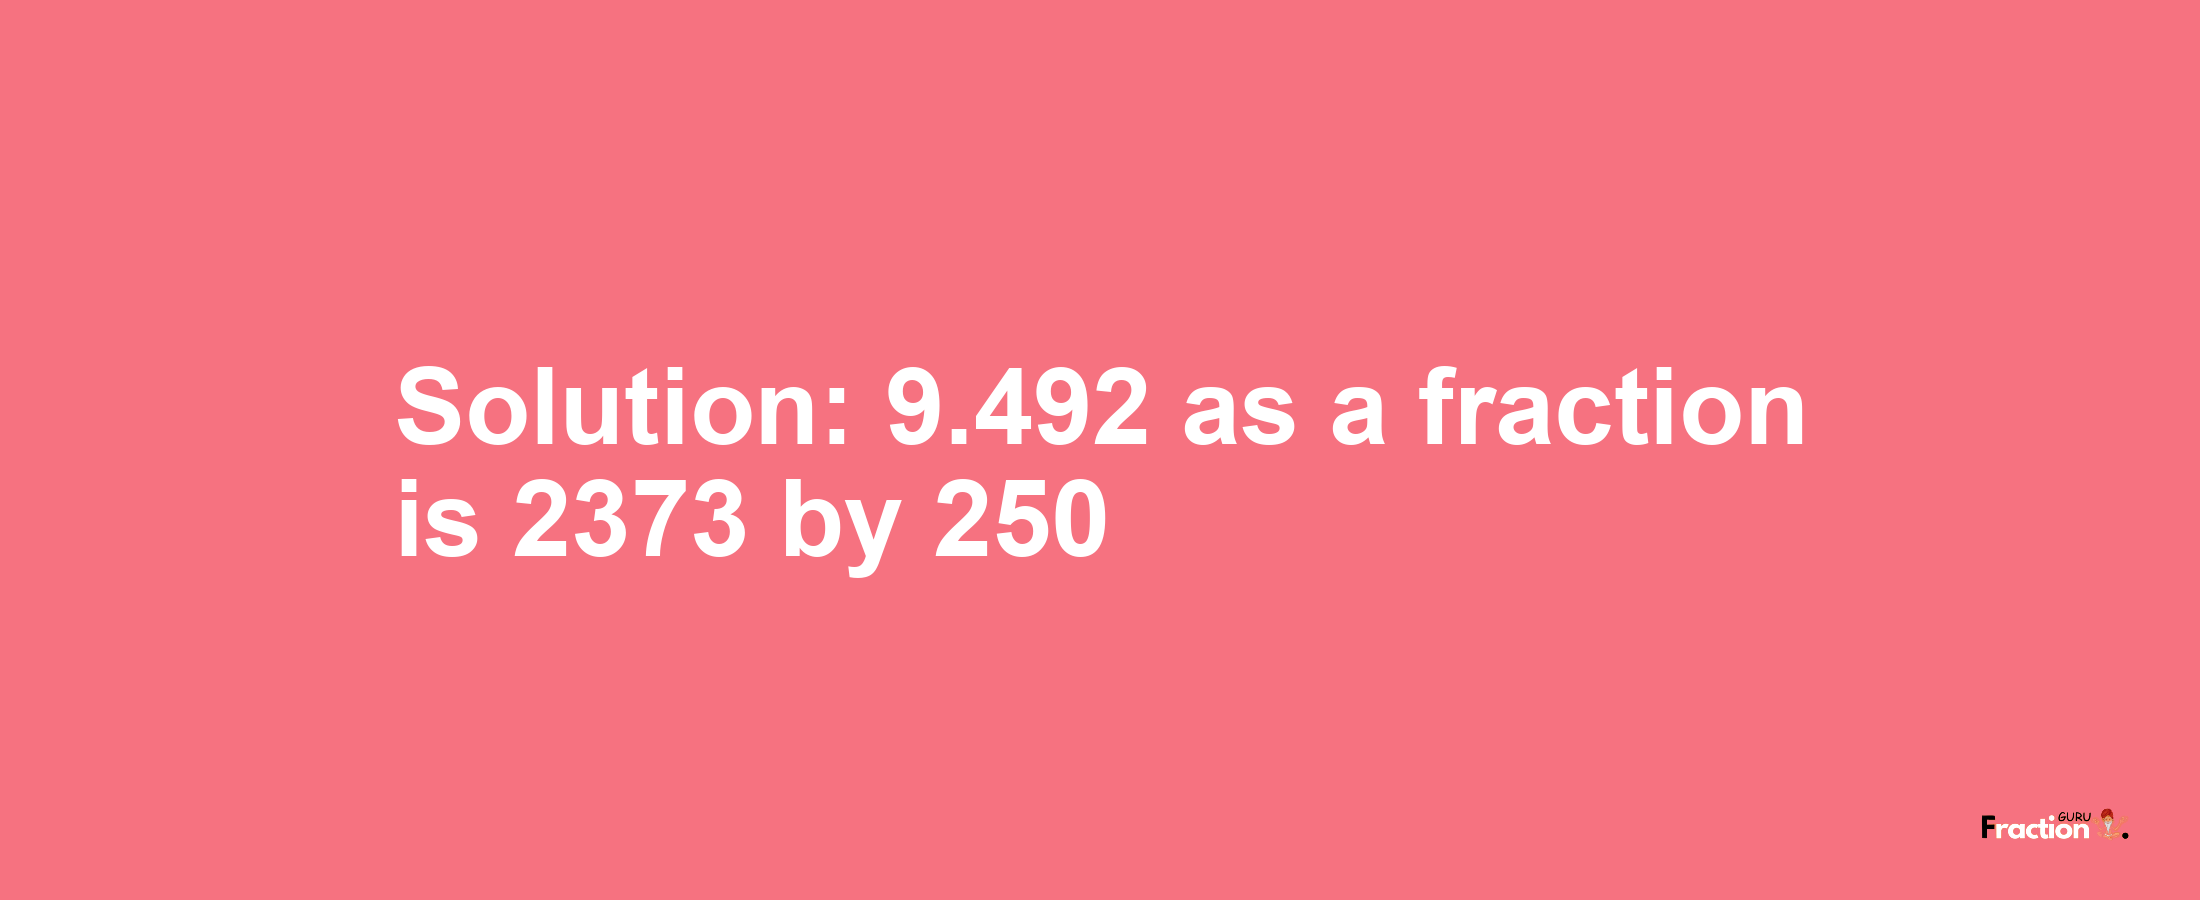 Solution:9.492 as a fraction is 2373/250